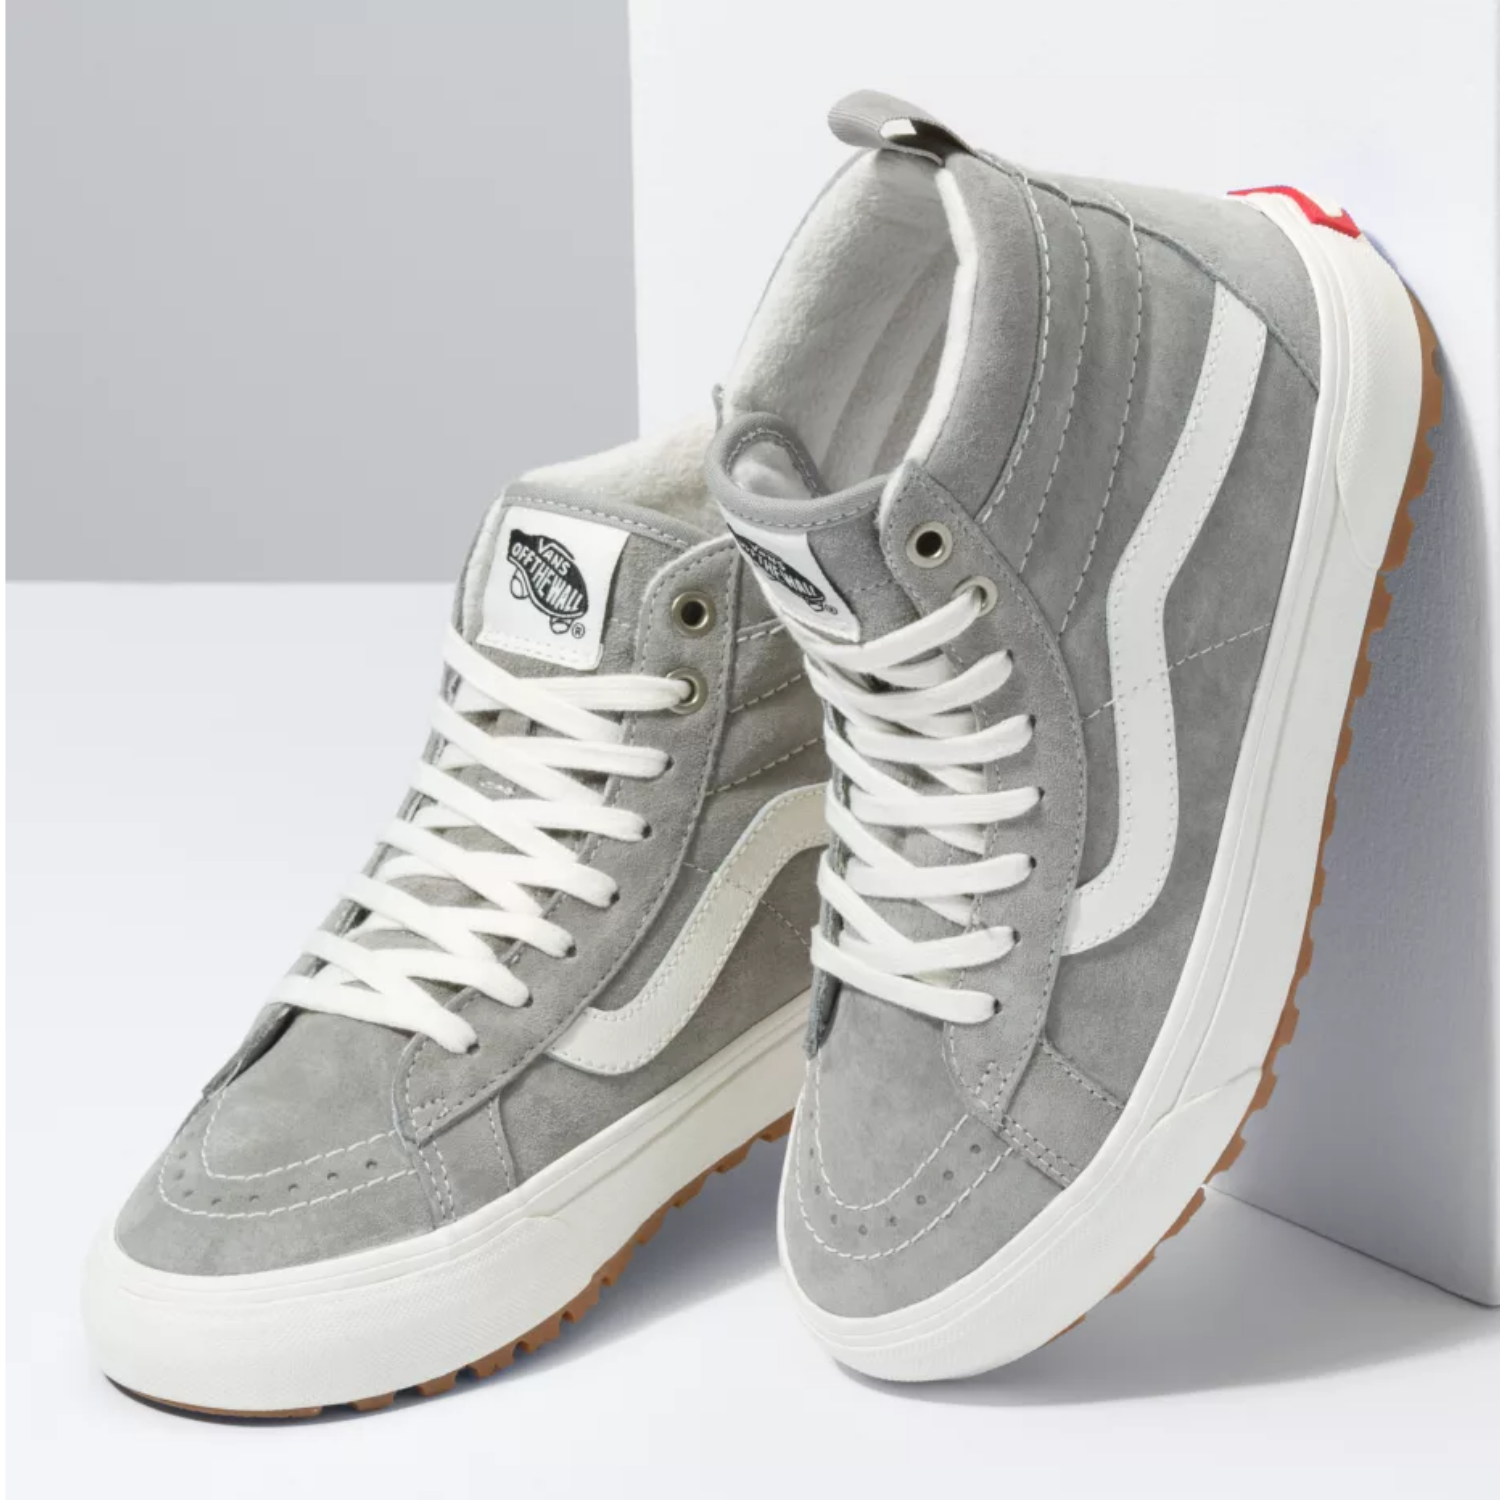 Sk8-Hi Drizzle/Marshmallow Skate Shoes For